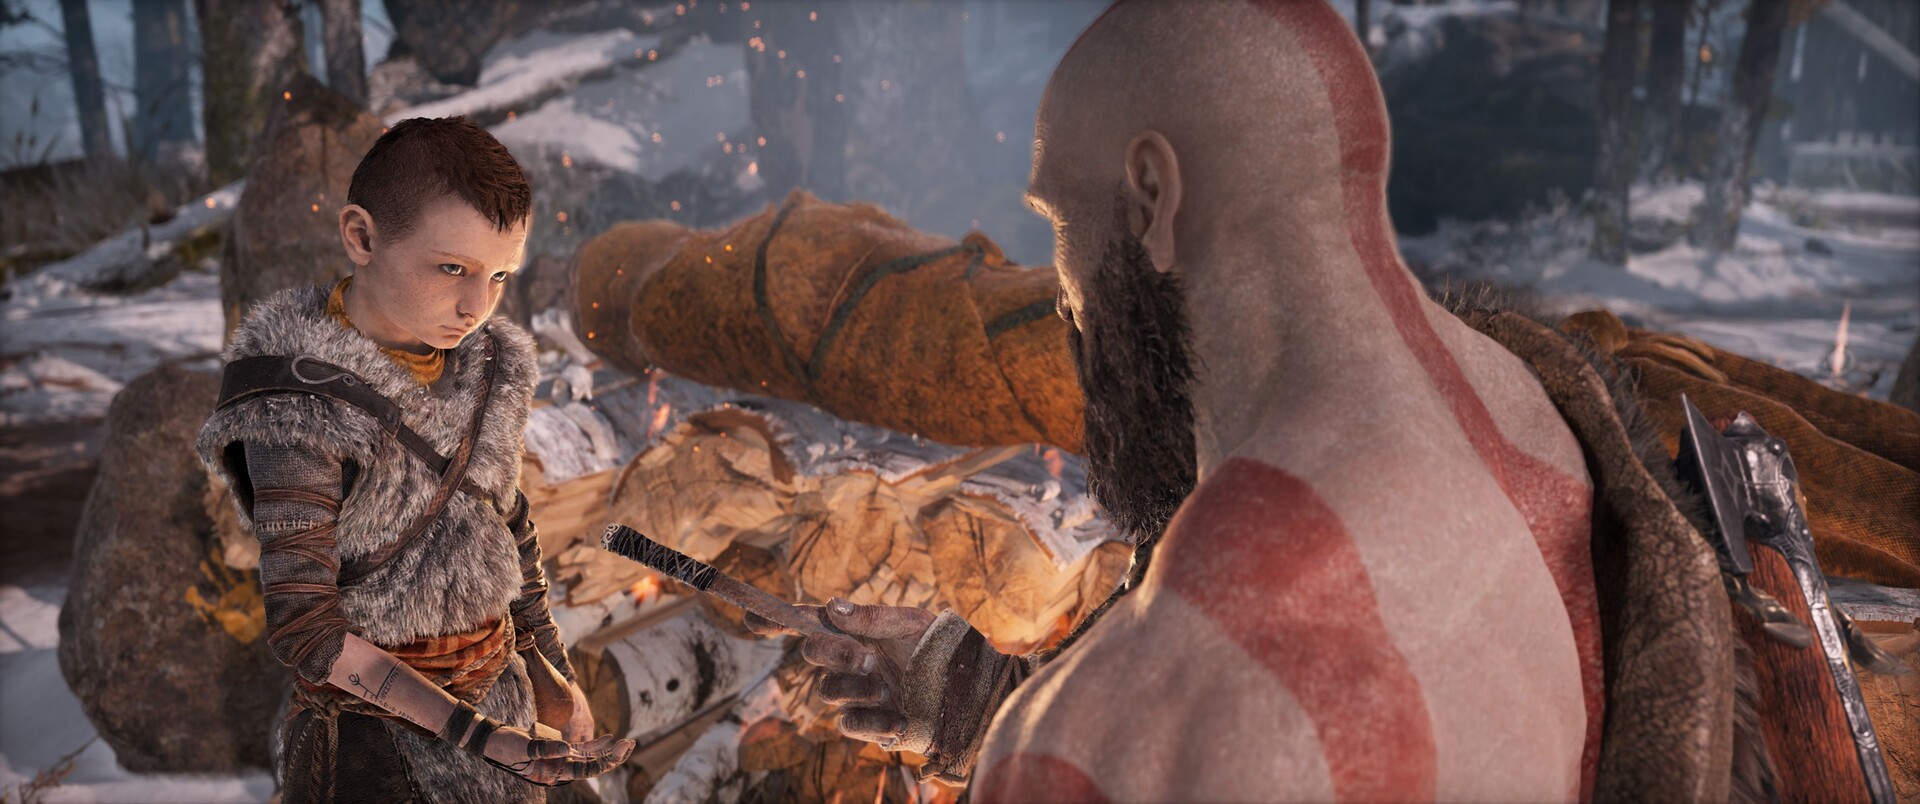 God of War PC Review - TechSyndrome